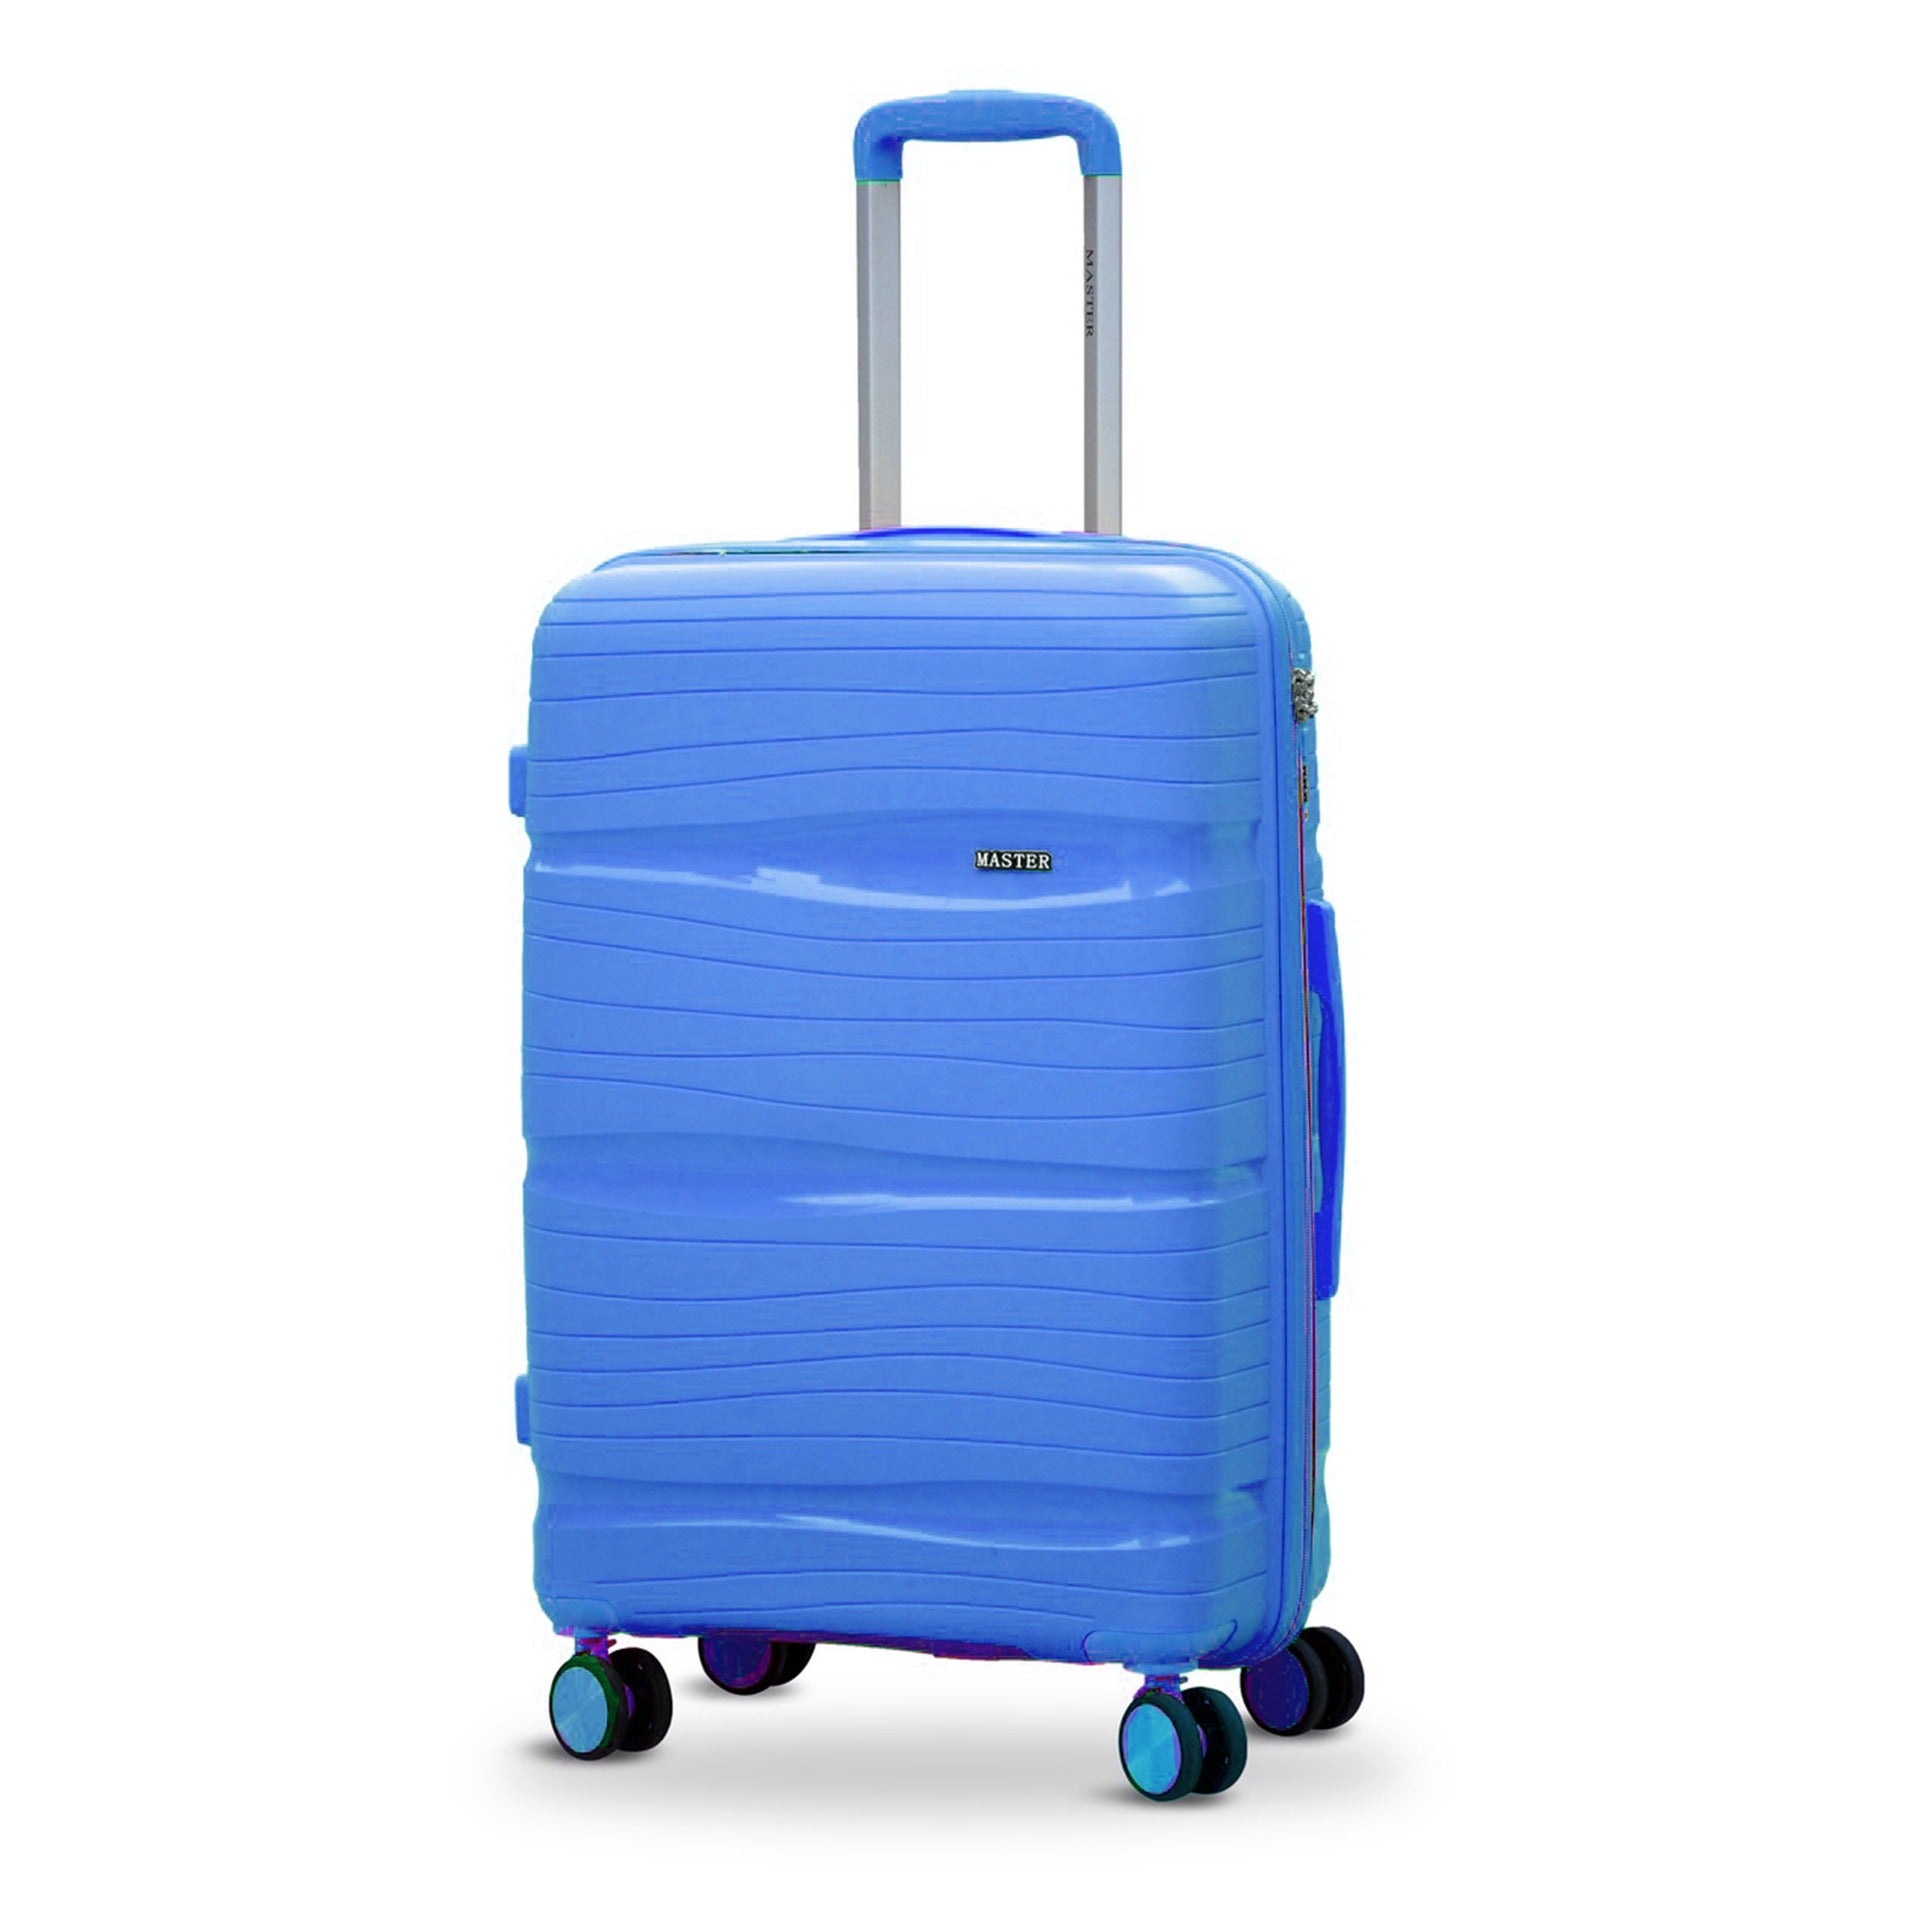 Unbreakable Carry On Luggage Bags 20 inch 7-10 Kg PP Material Trolley